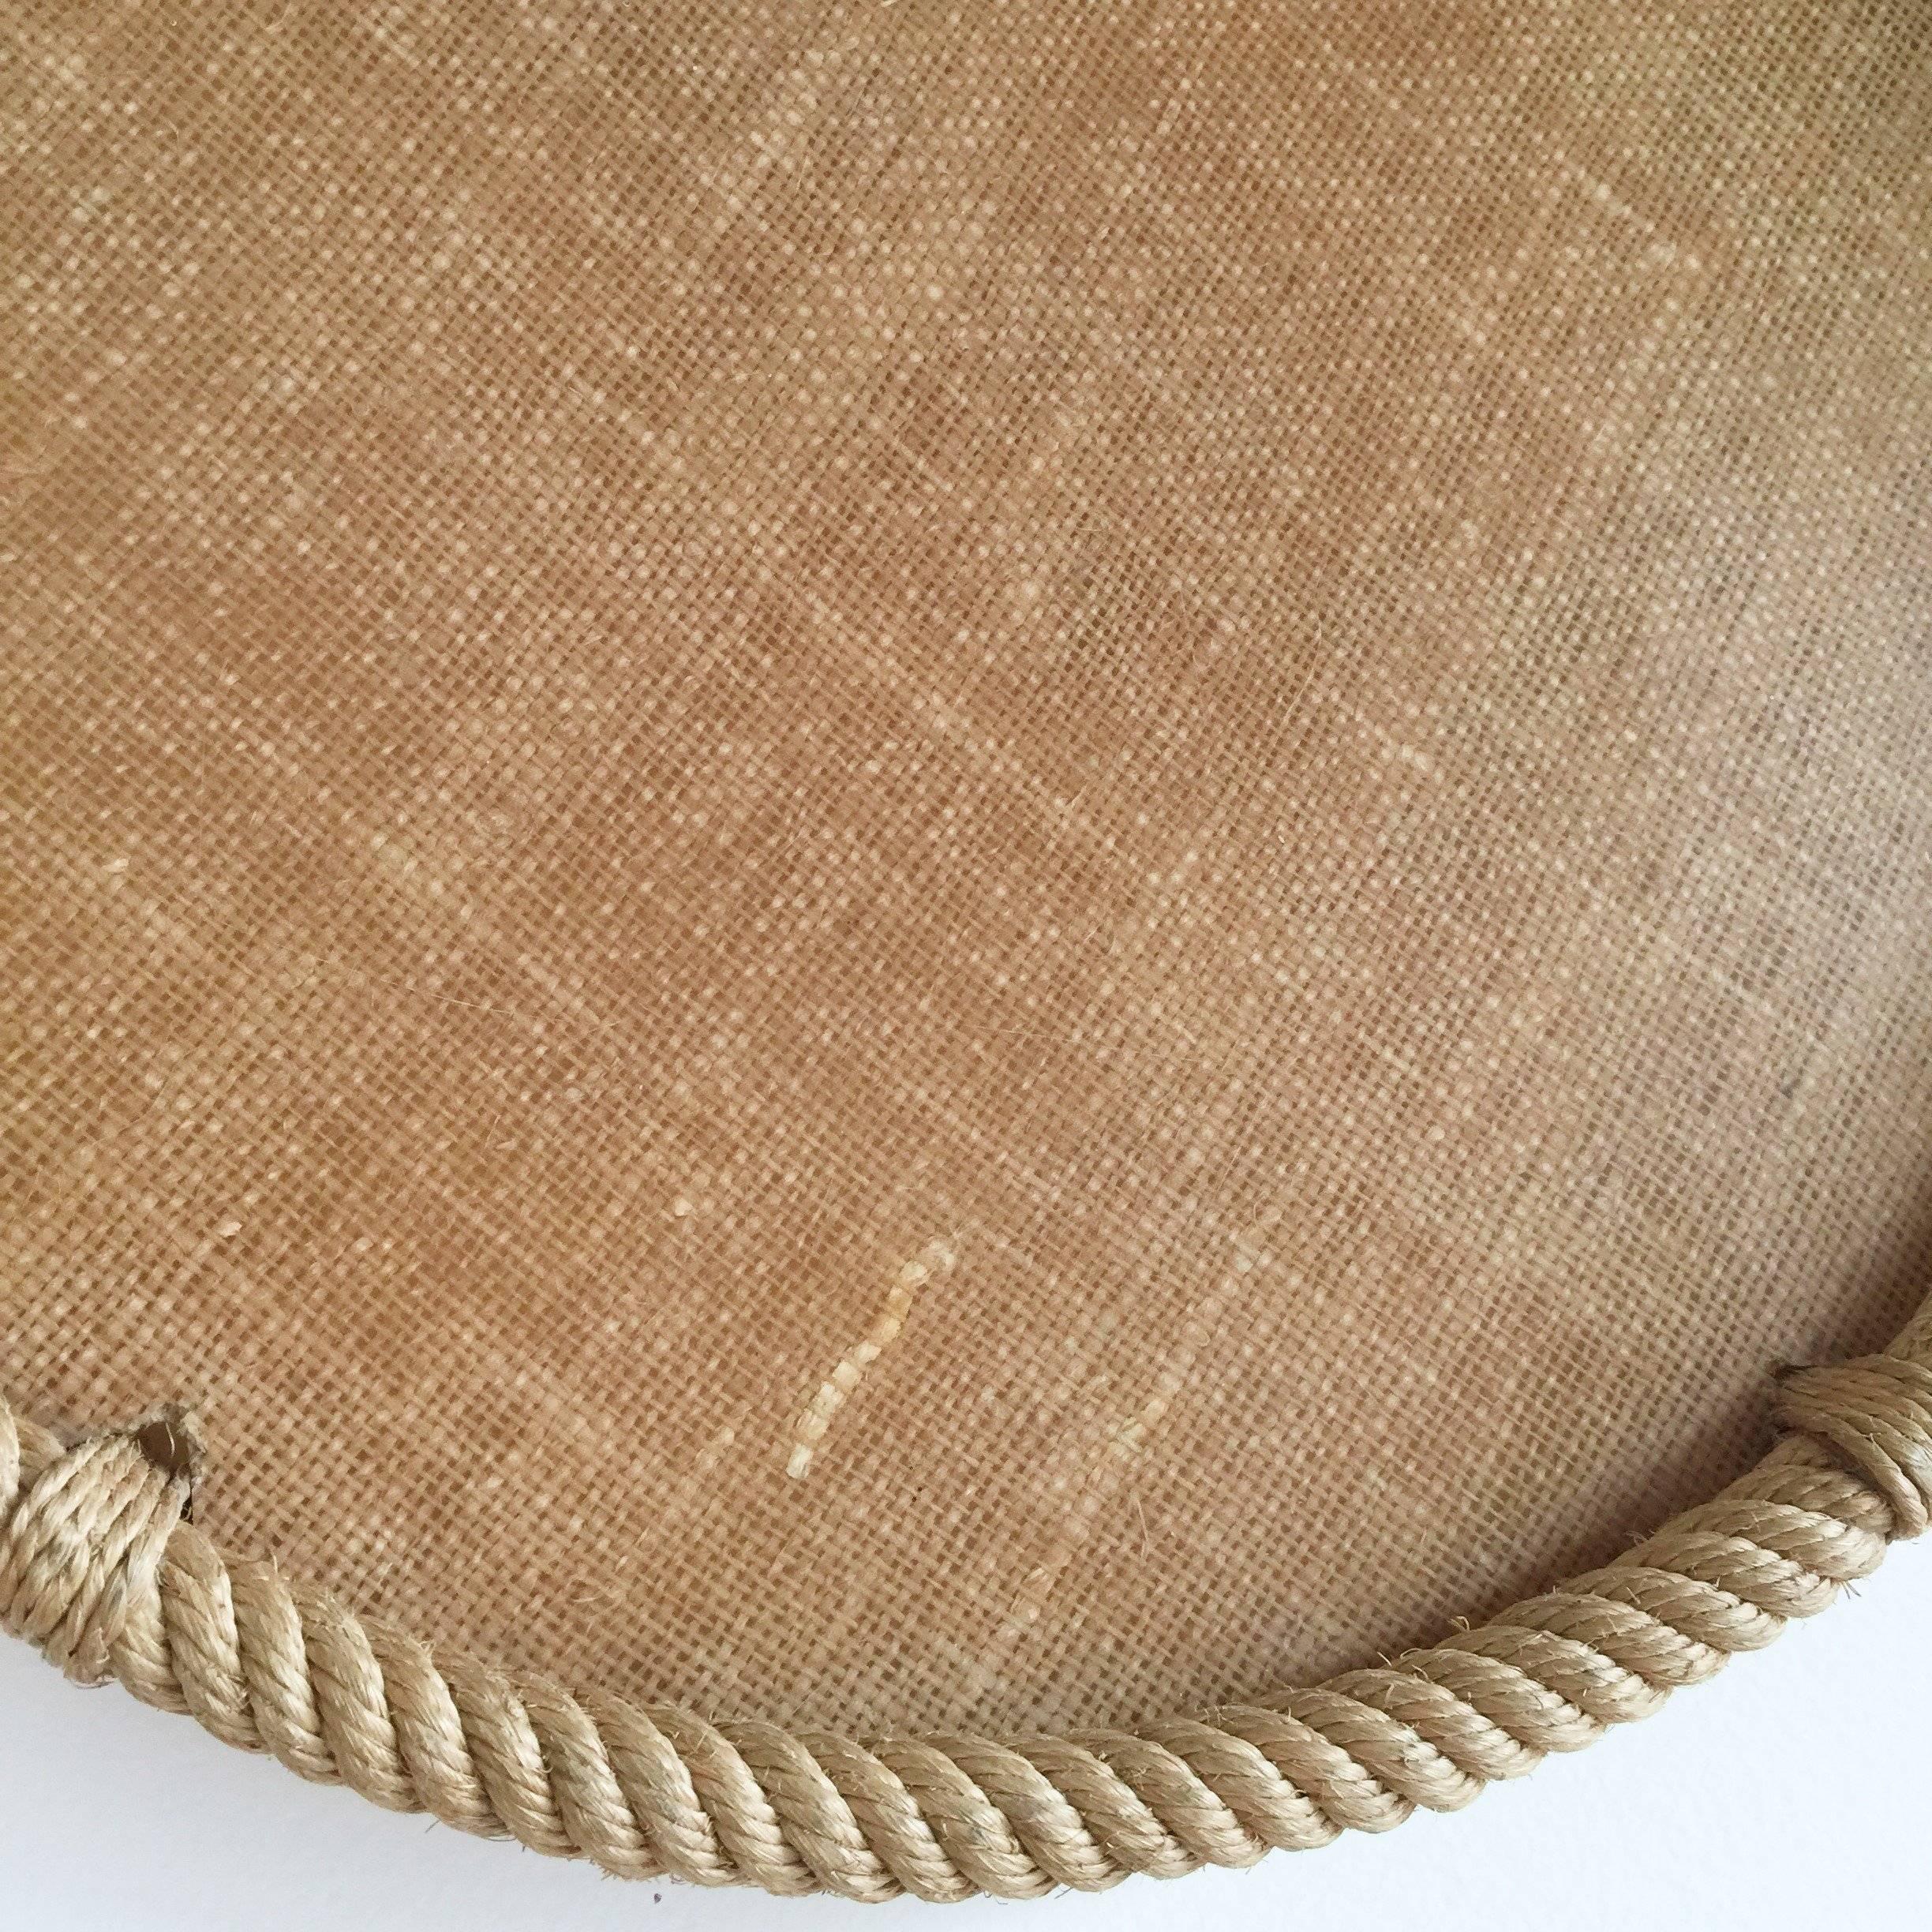 Rope and Raffia Mesh Resin Tray by Audoux Minet, France, 1960s at 1stDibs